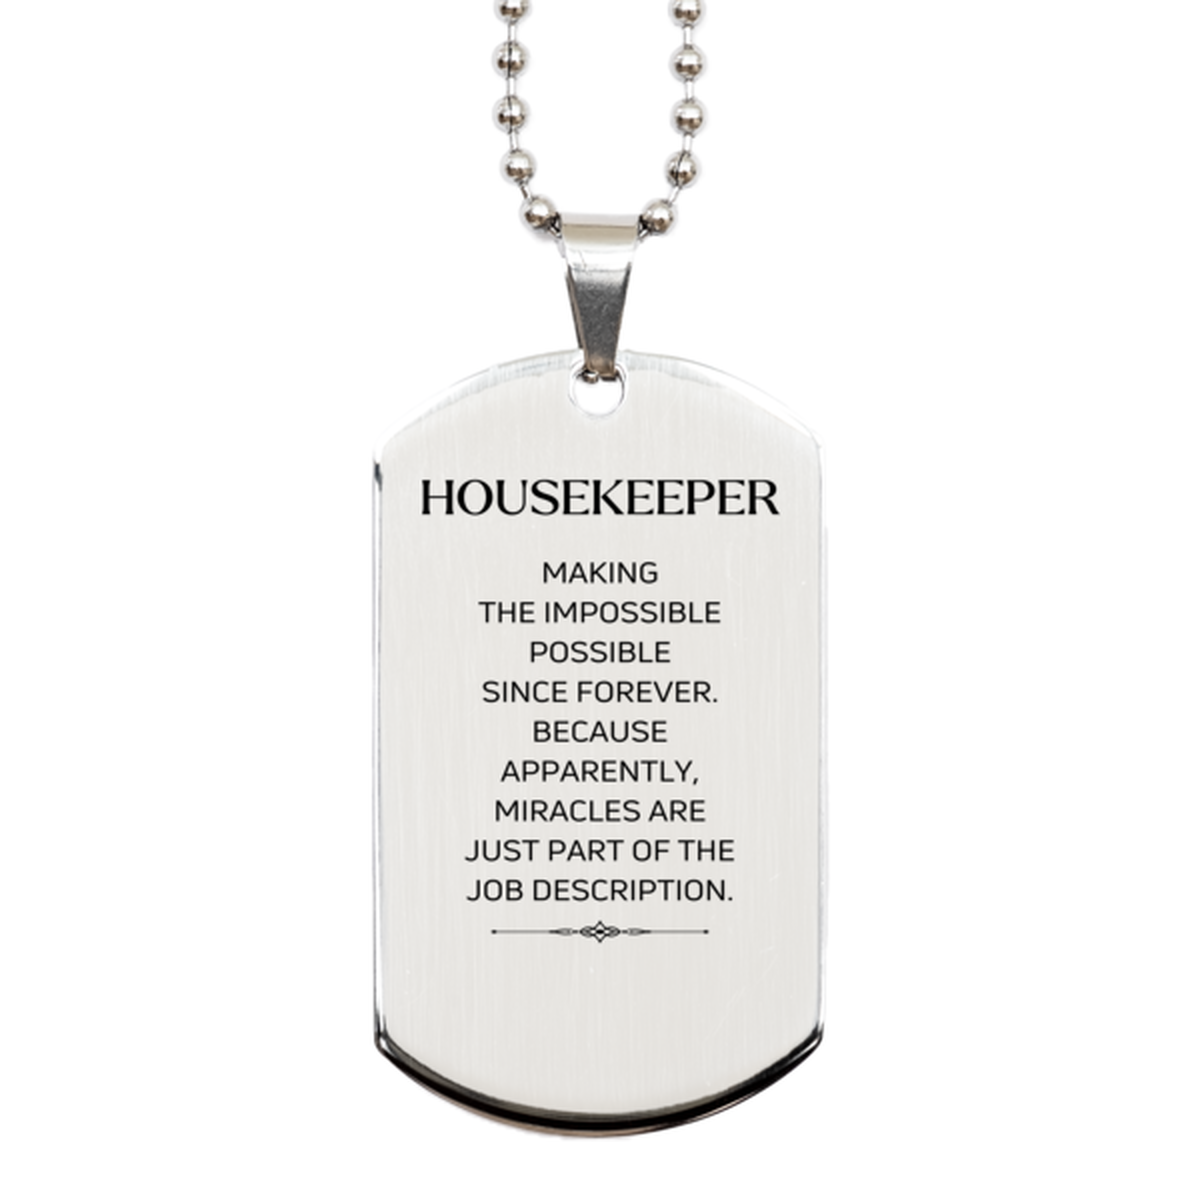 Funny Housekeeper Gifts, Miracles are just part of the job description, Inspirational Birthday Silver Dog Tag For Housekeeper, Men, Women, Coworkers, Friends, Boss